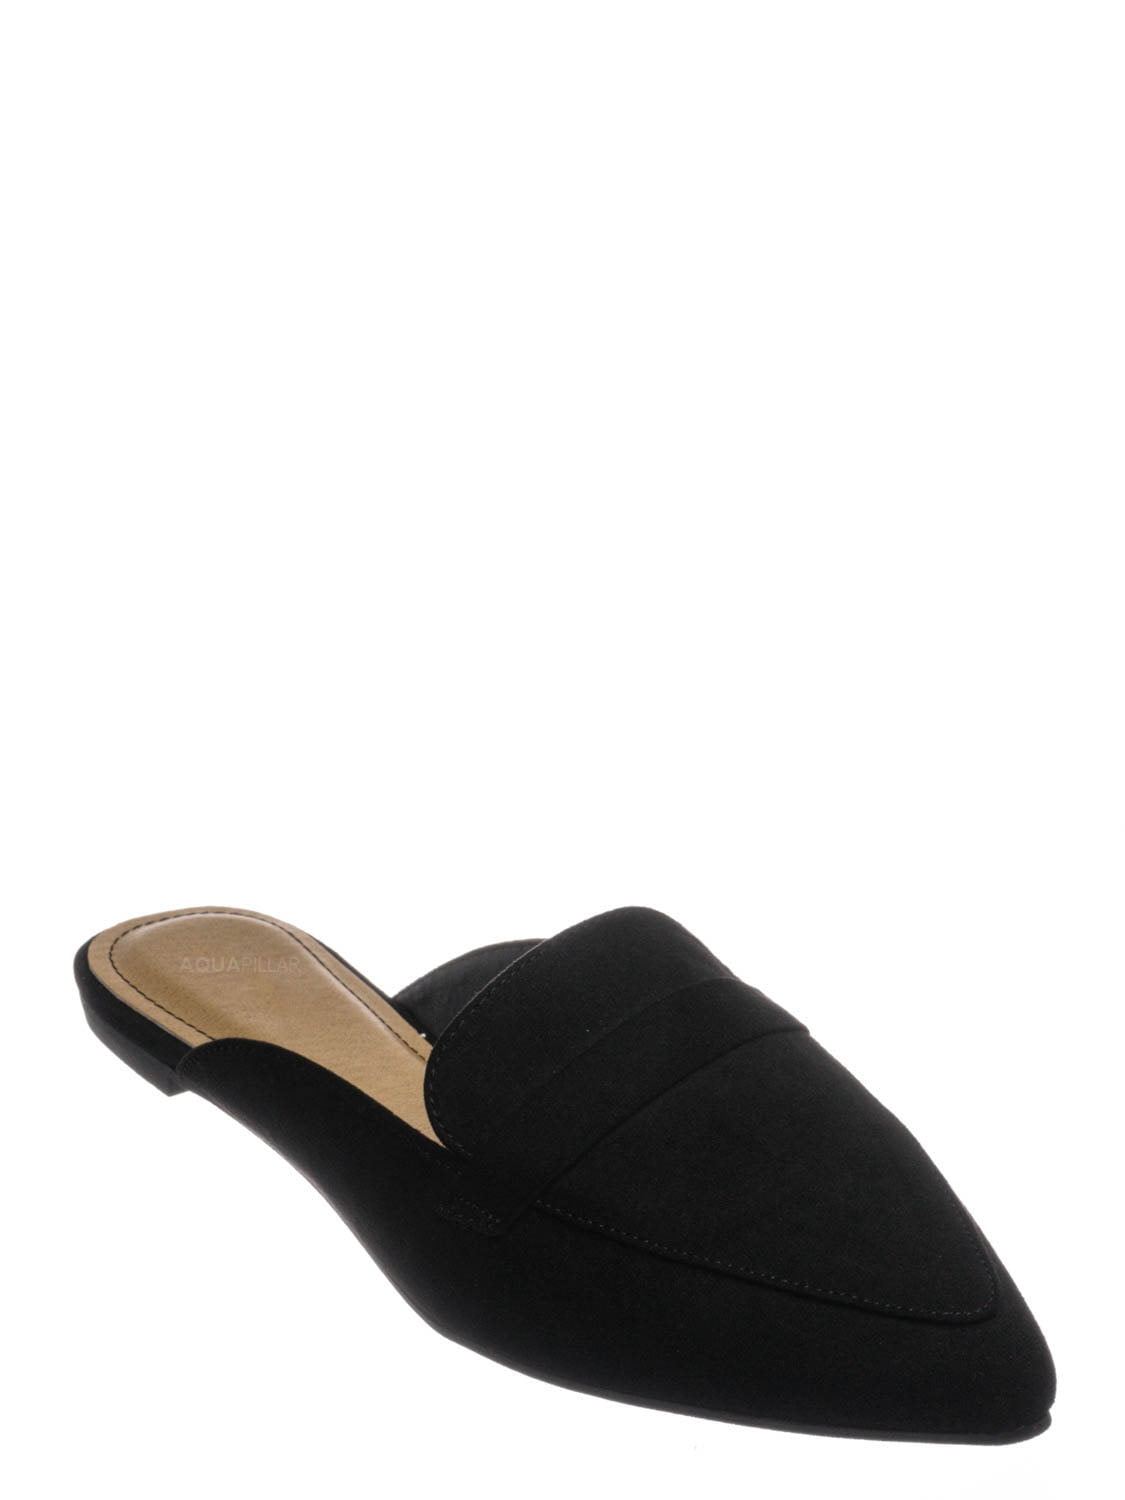 bamboo mules shoes